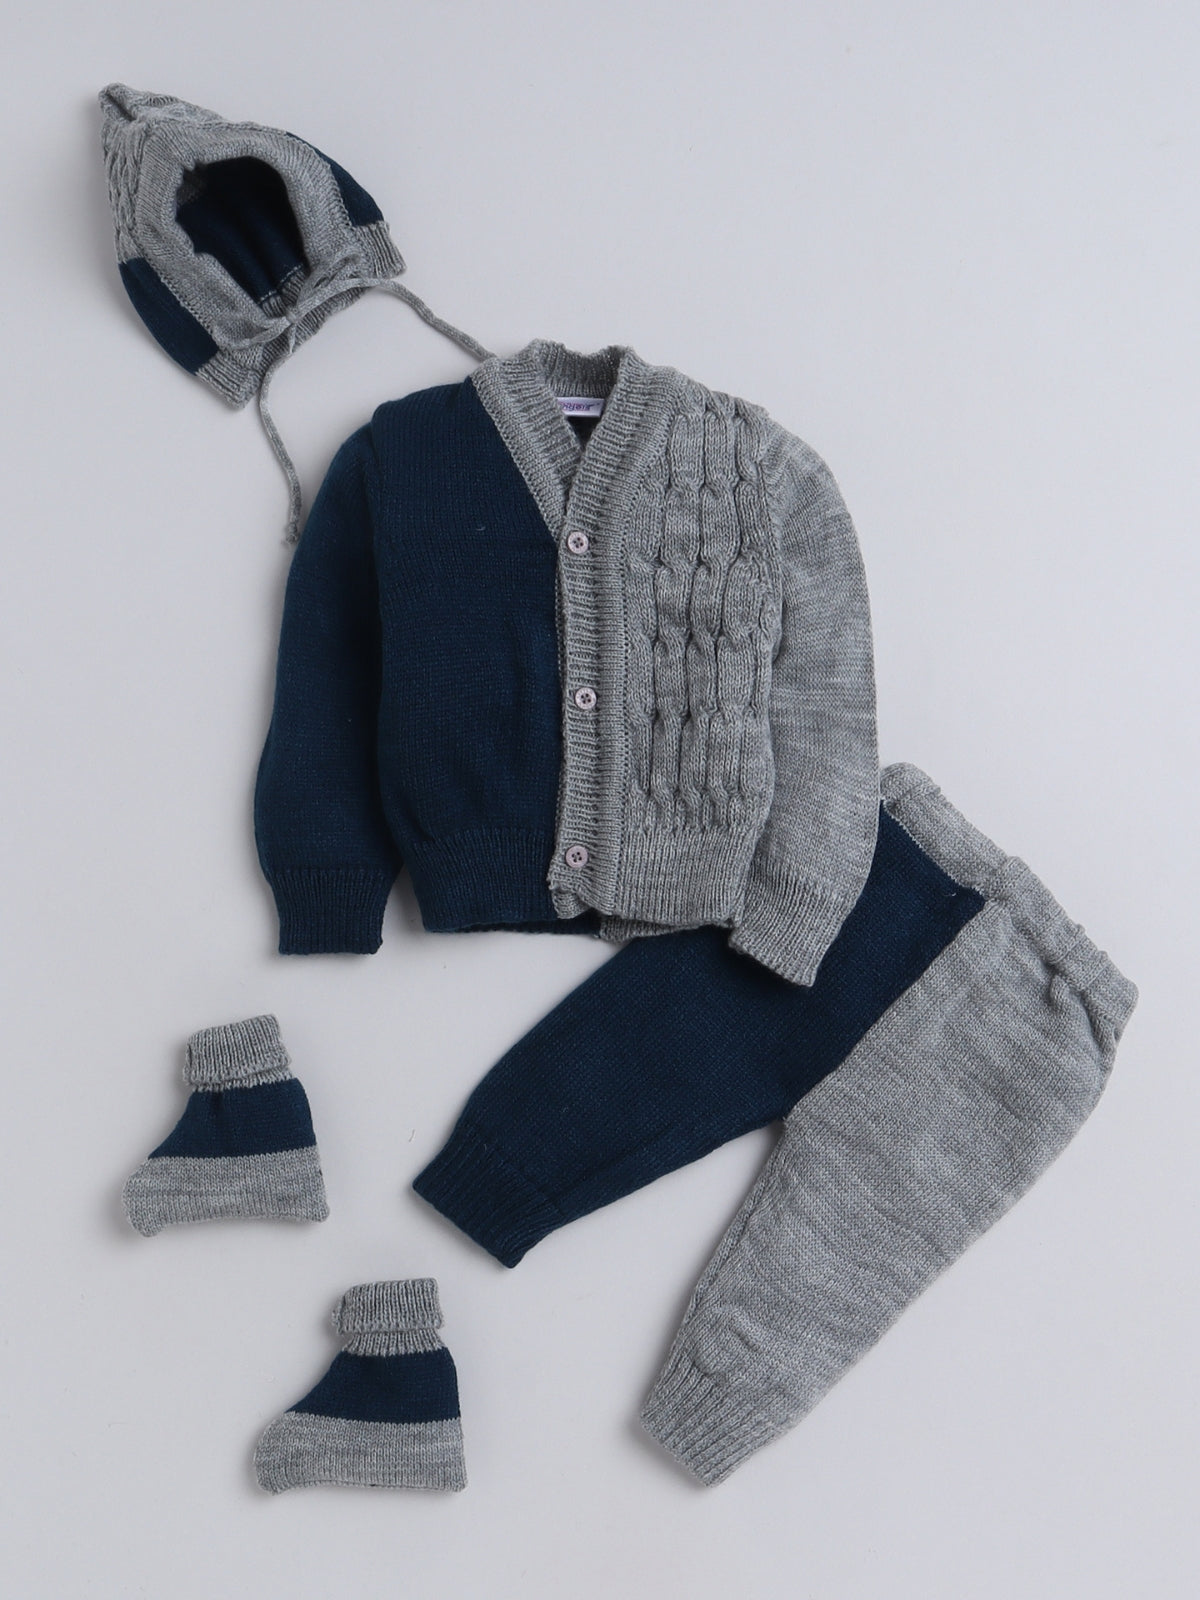 4 Pcs Sweater Set With Matching Caps and Socks